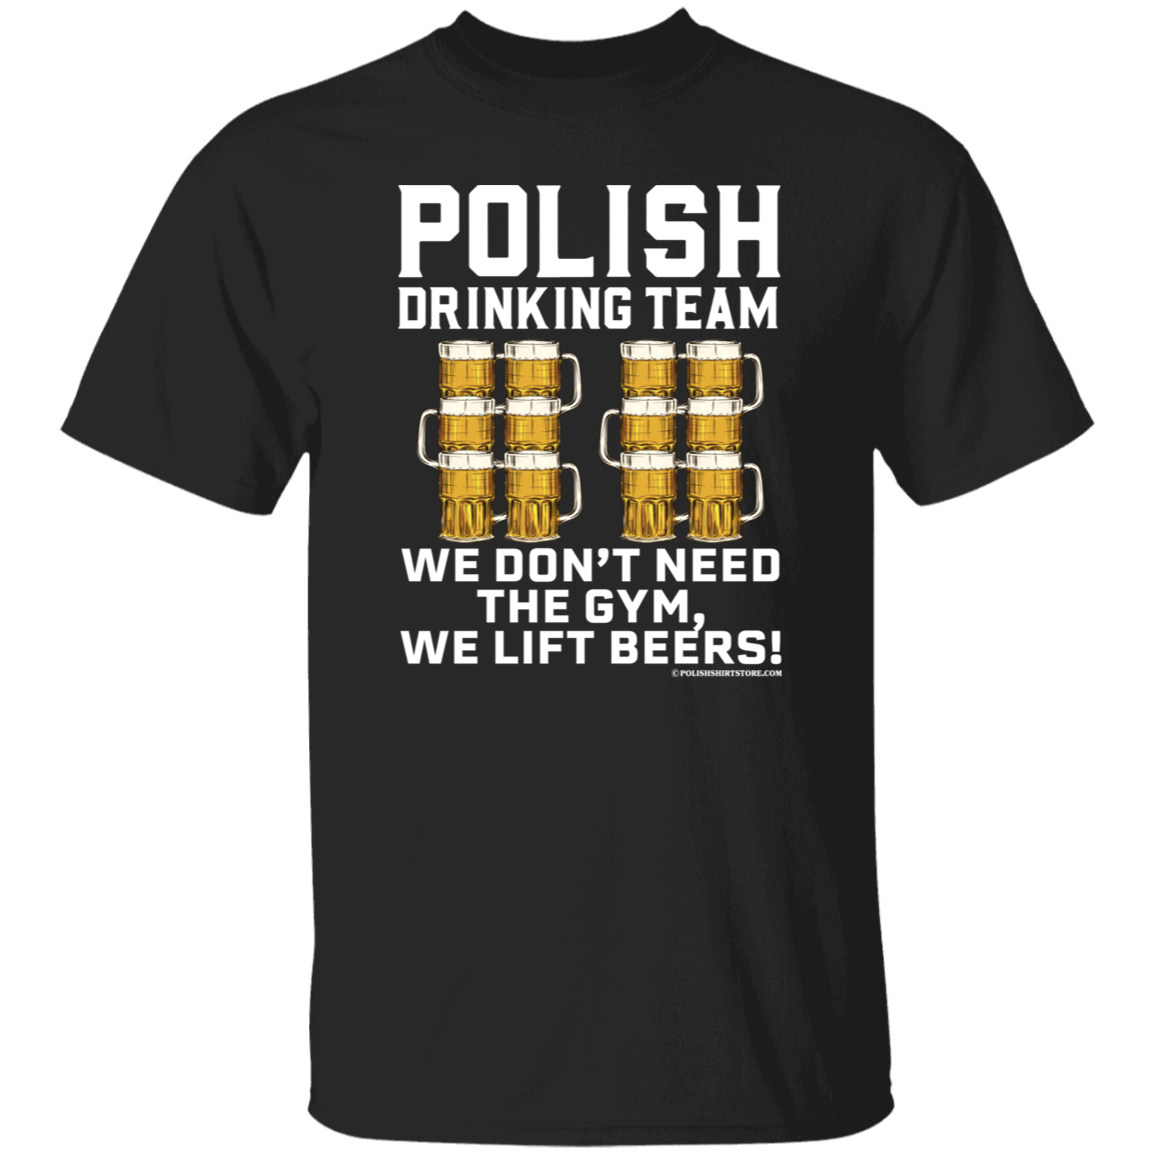 Polish Drinking Team We Dont Need The Gym, We Lift Beers Apparel CustomCat G500 5.3 oz. T-Shirt Black S